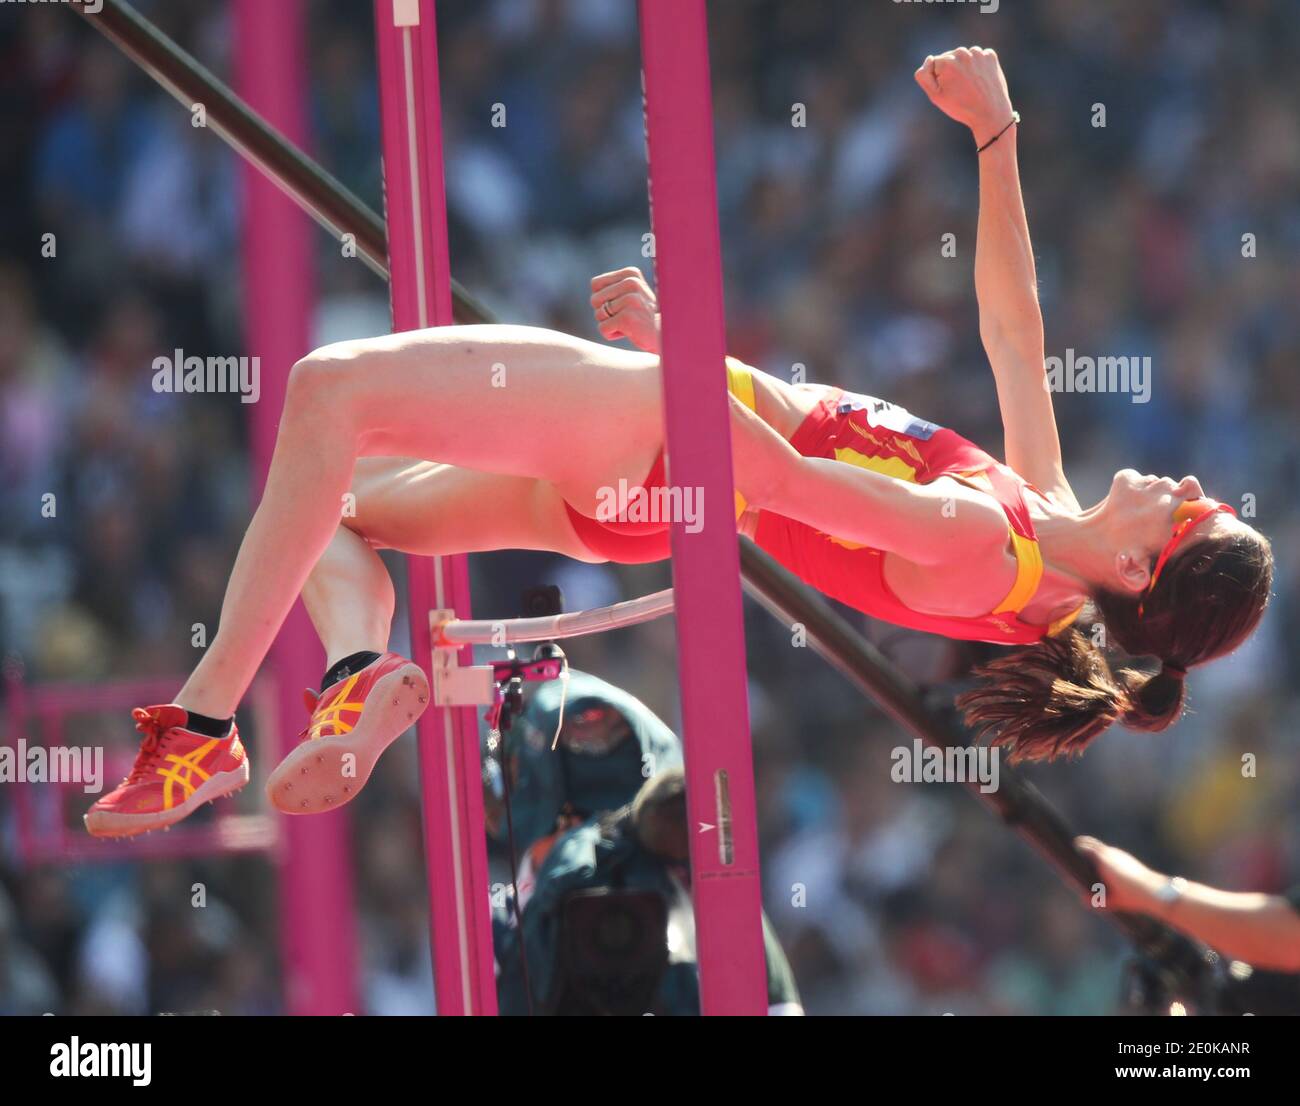 Spain's Ruth Betia during the Women's High Jump competition at the London 2012 Summer Olympics in London, UK on August 9, 2012. Photo by Giuliano Bevilacqua/ABACAPRESS.COM Stock Photo